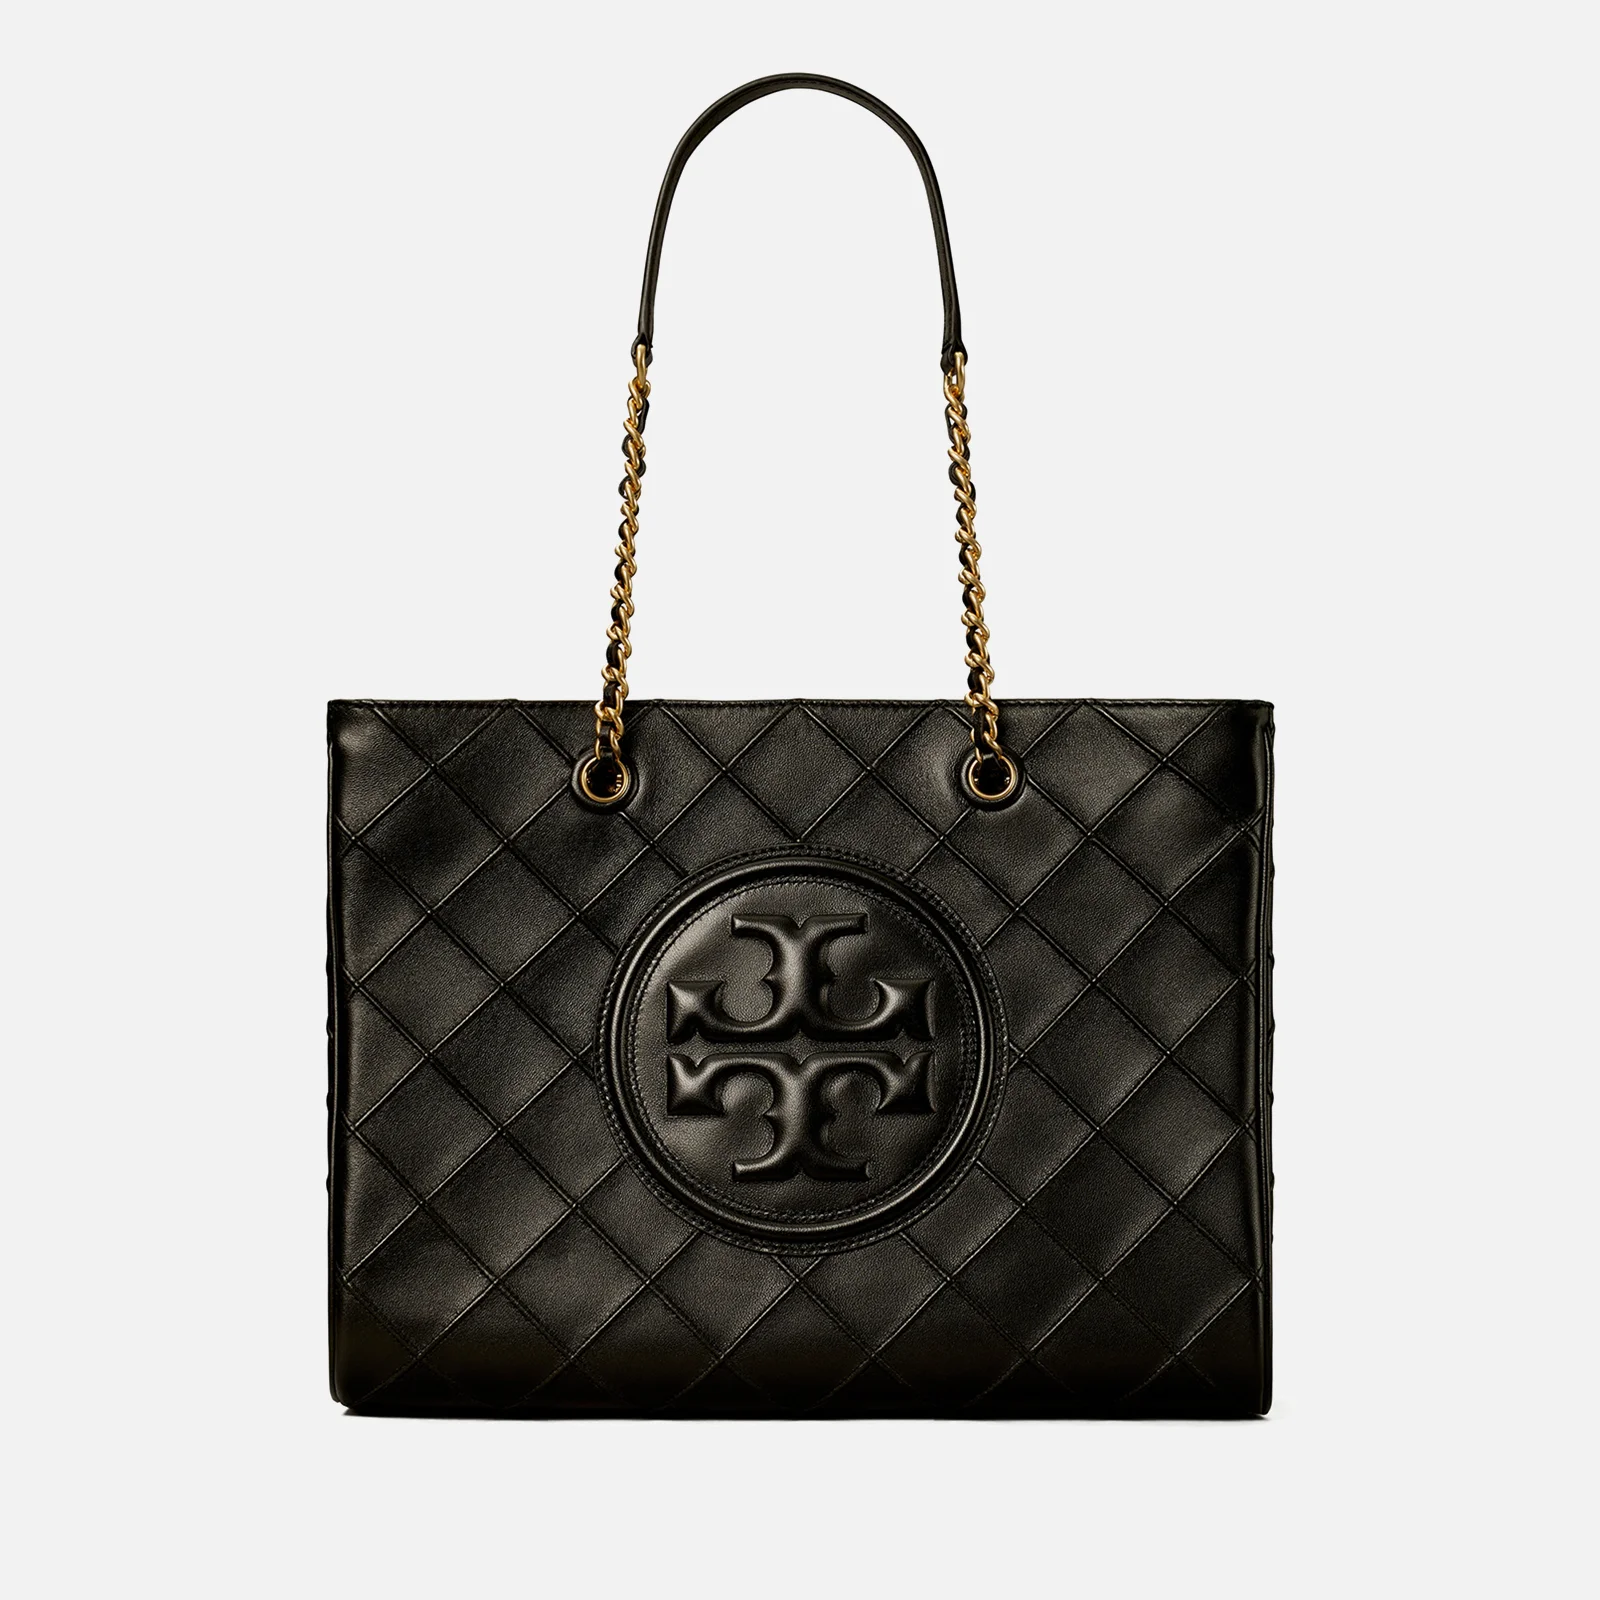 Tory Burch Fleming Soft Chain Leather Tote Bag Image 1